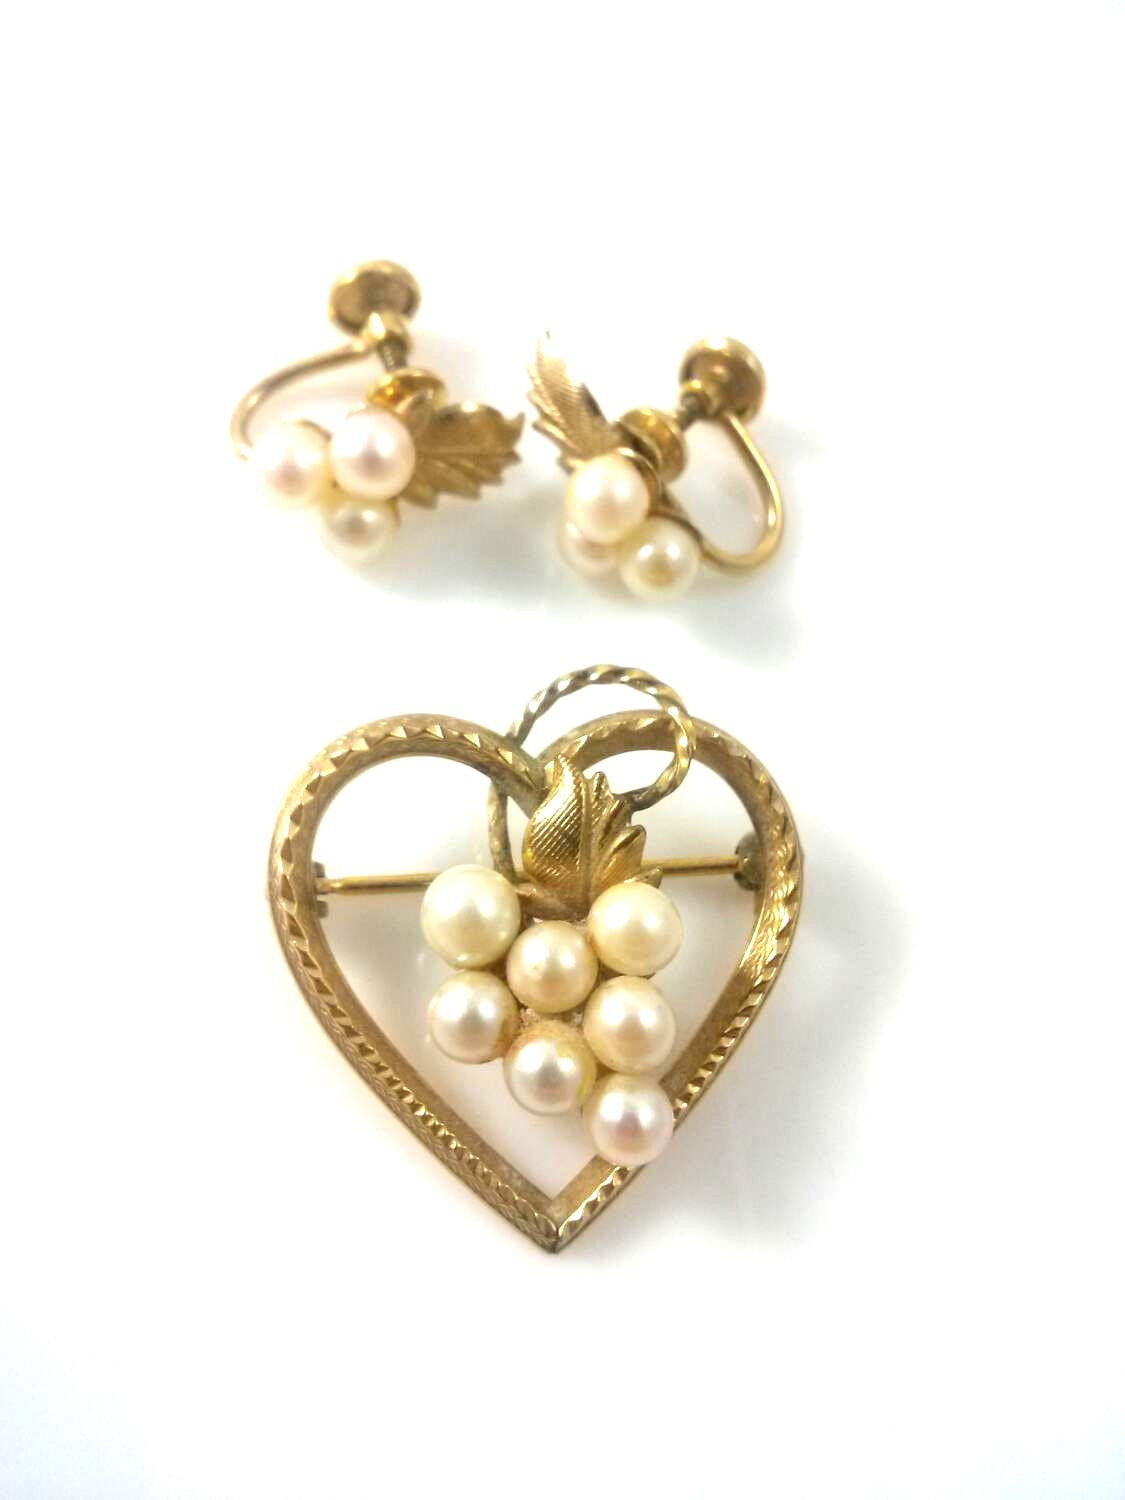 Demi Parure DCE 14KT GF Faux Pearl Screw Back Earrings with Heart Shaped Brooch - Dirty 30 Vintage | Vintage Clothing, Vintage Jewelry, Vintage Accessories